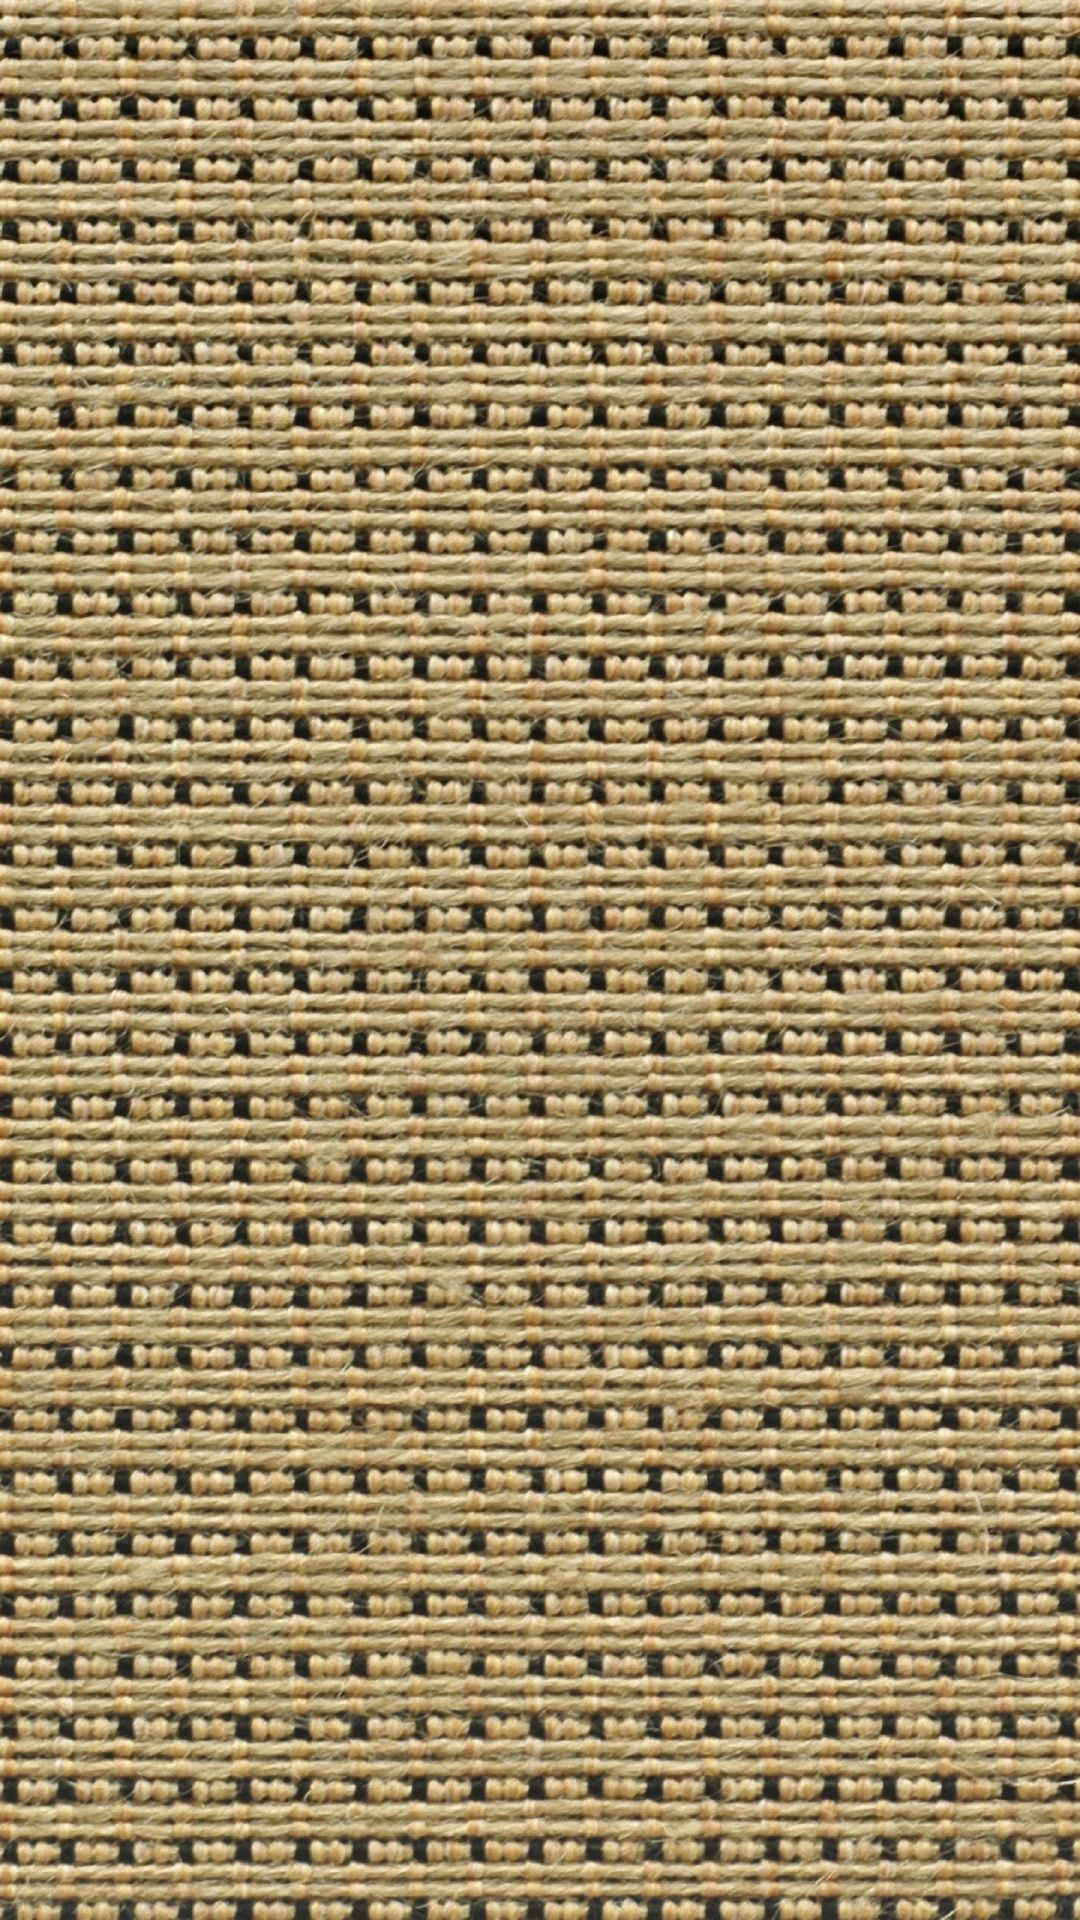 Mesh Carpet Material htc one m8 Wallpapers HD 1080x1920